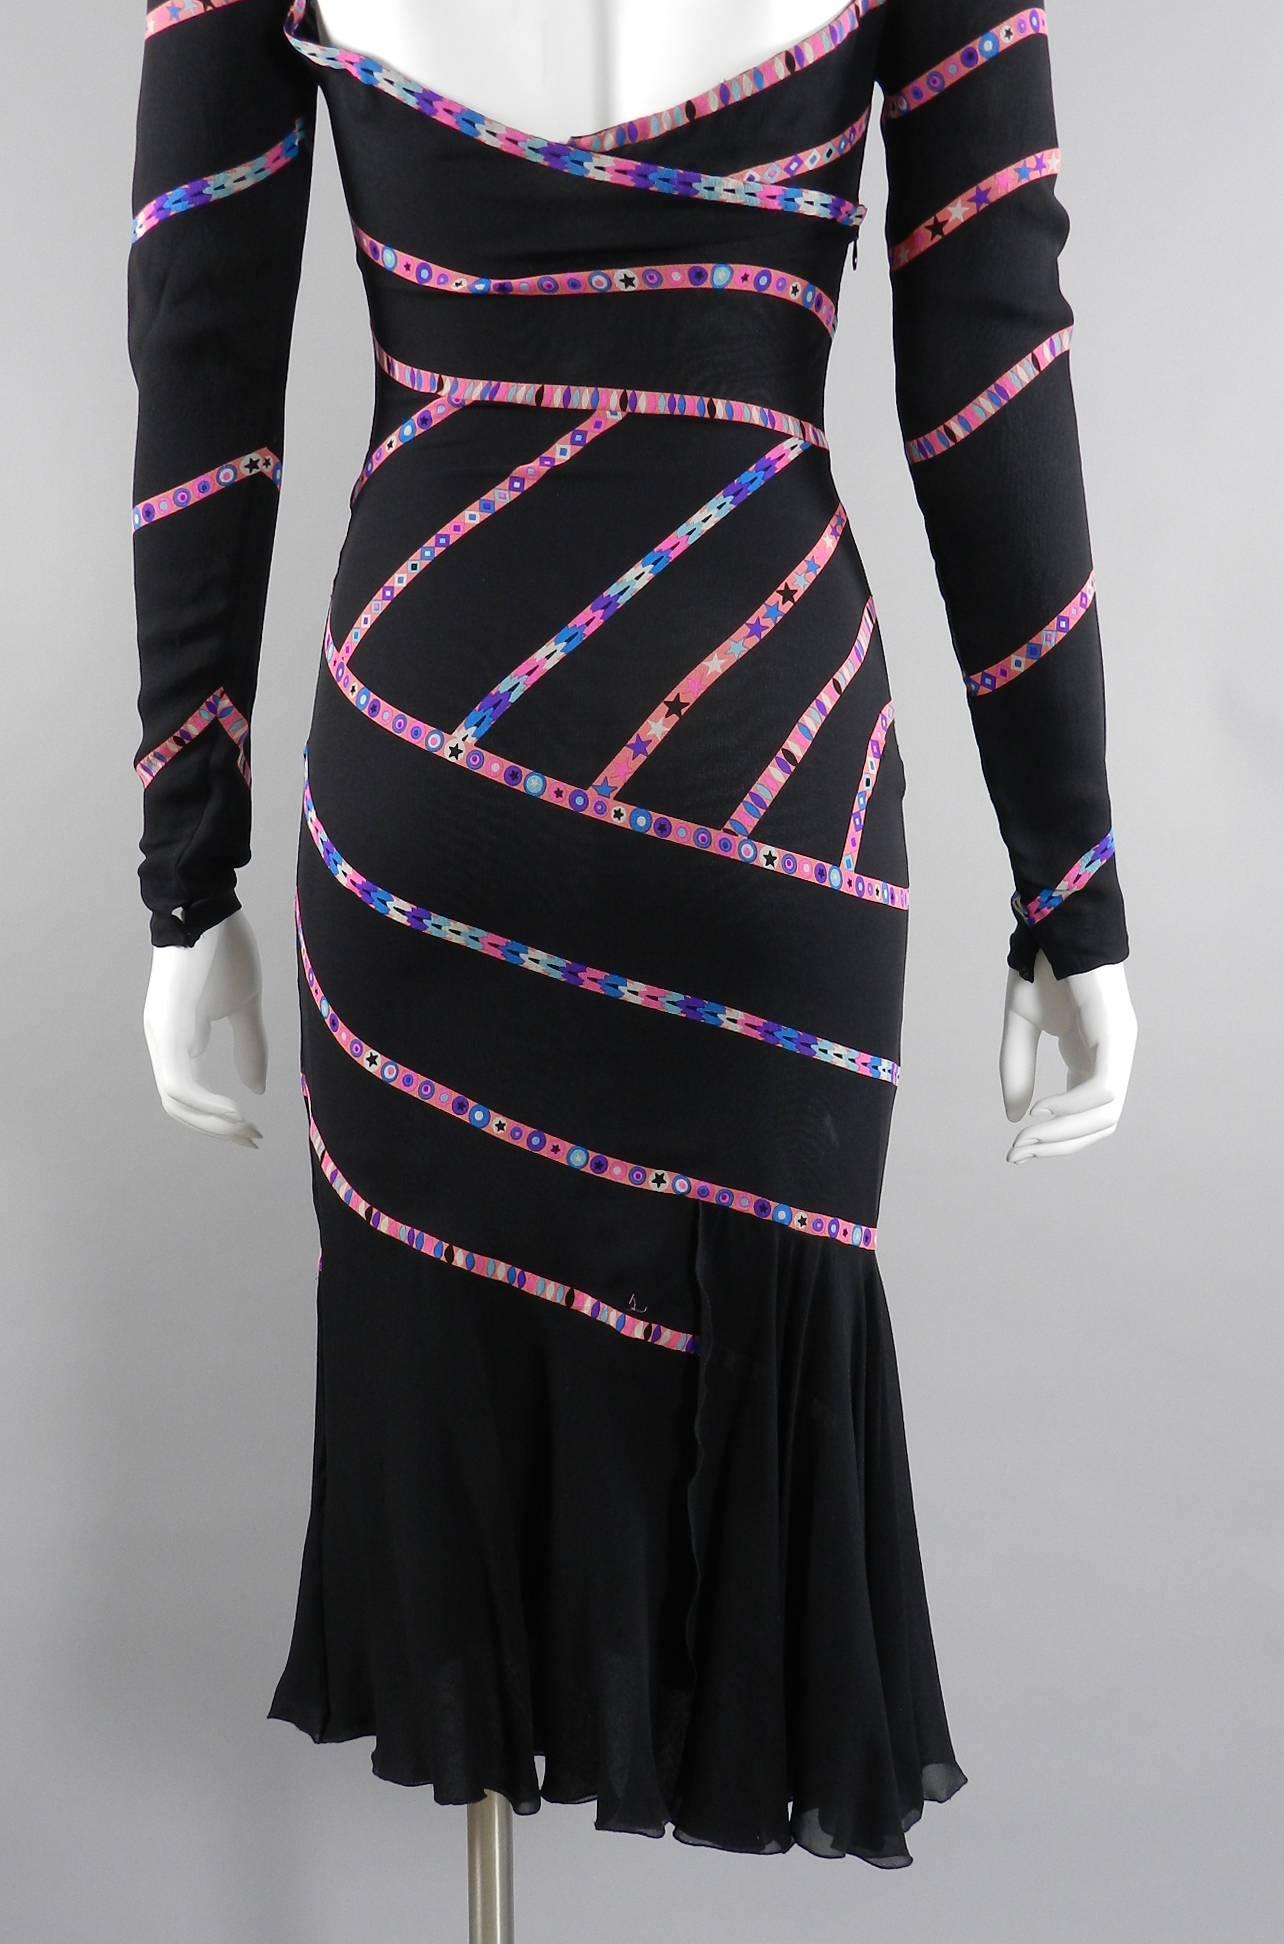 Women's Gianni Versace 1990's Black and Pink Silk Dress with Stars For Sale